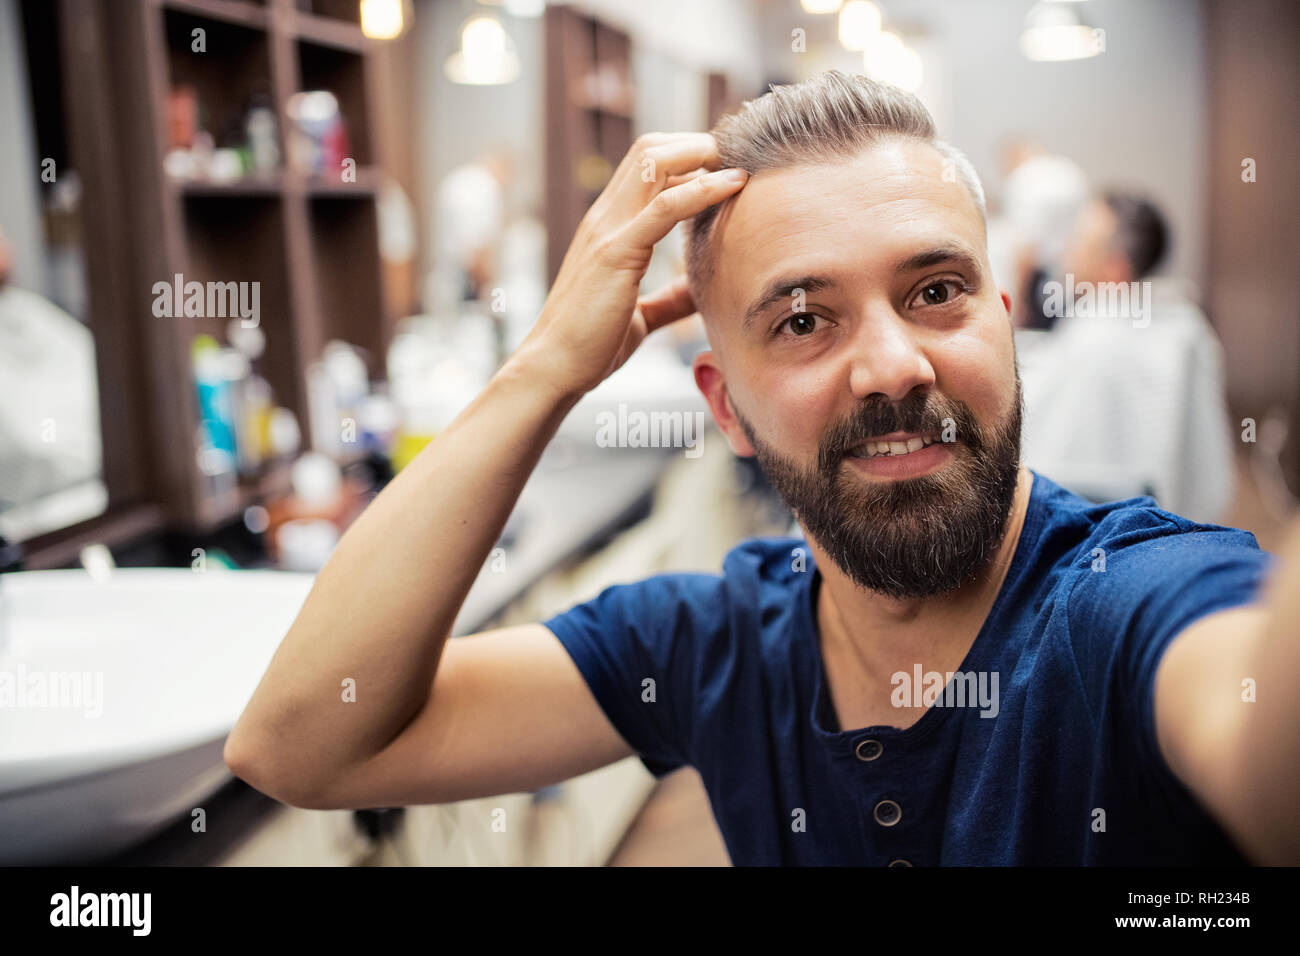 A hipster man client in barber shop, taking seflie. Copy space. Stock Photo